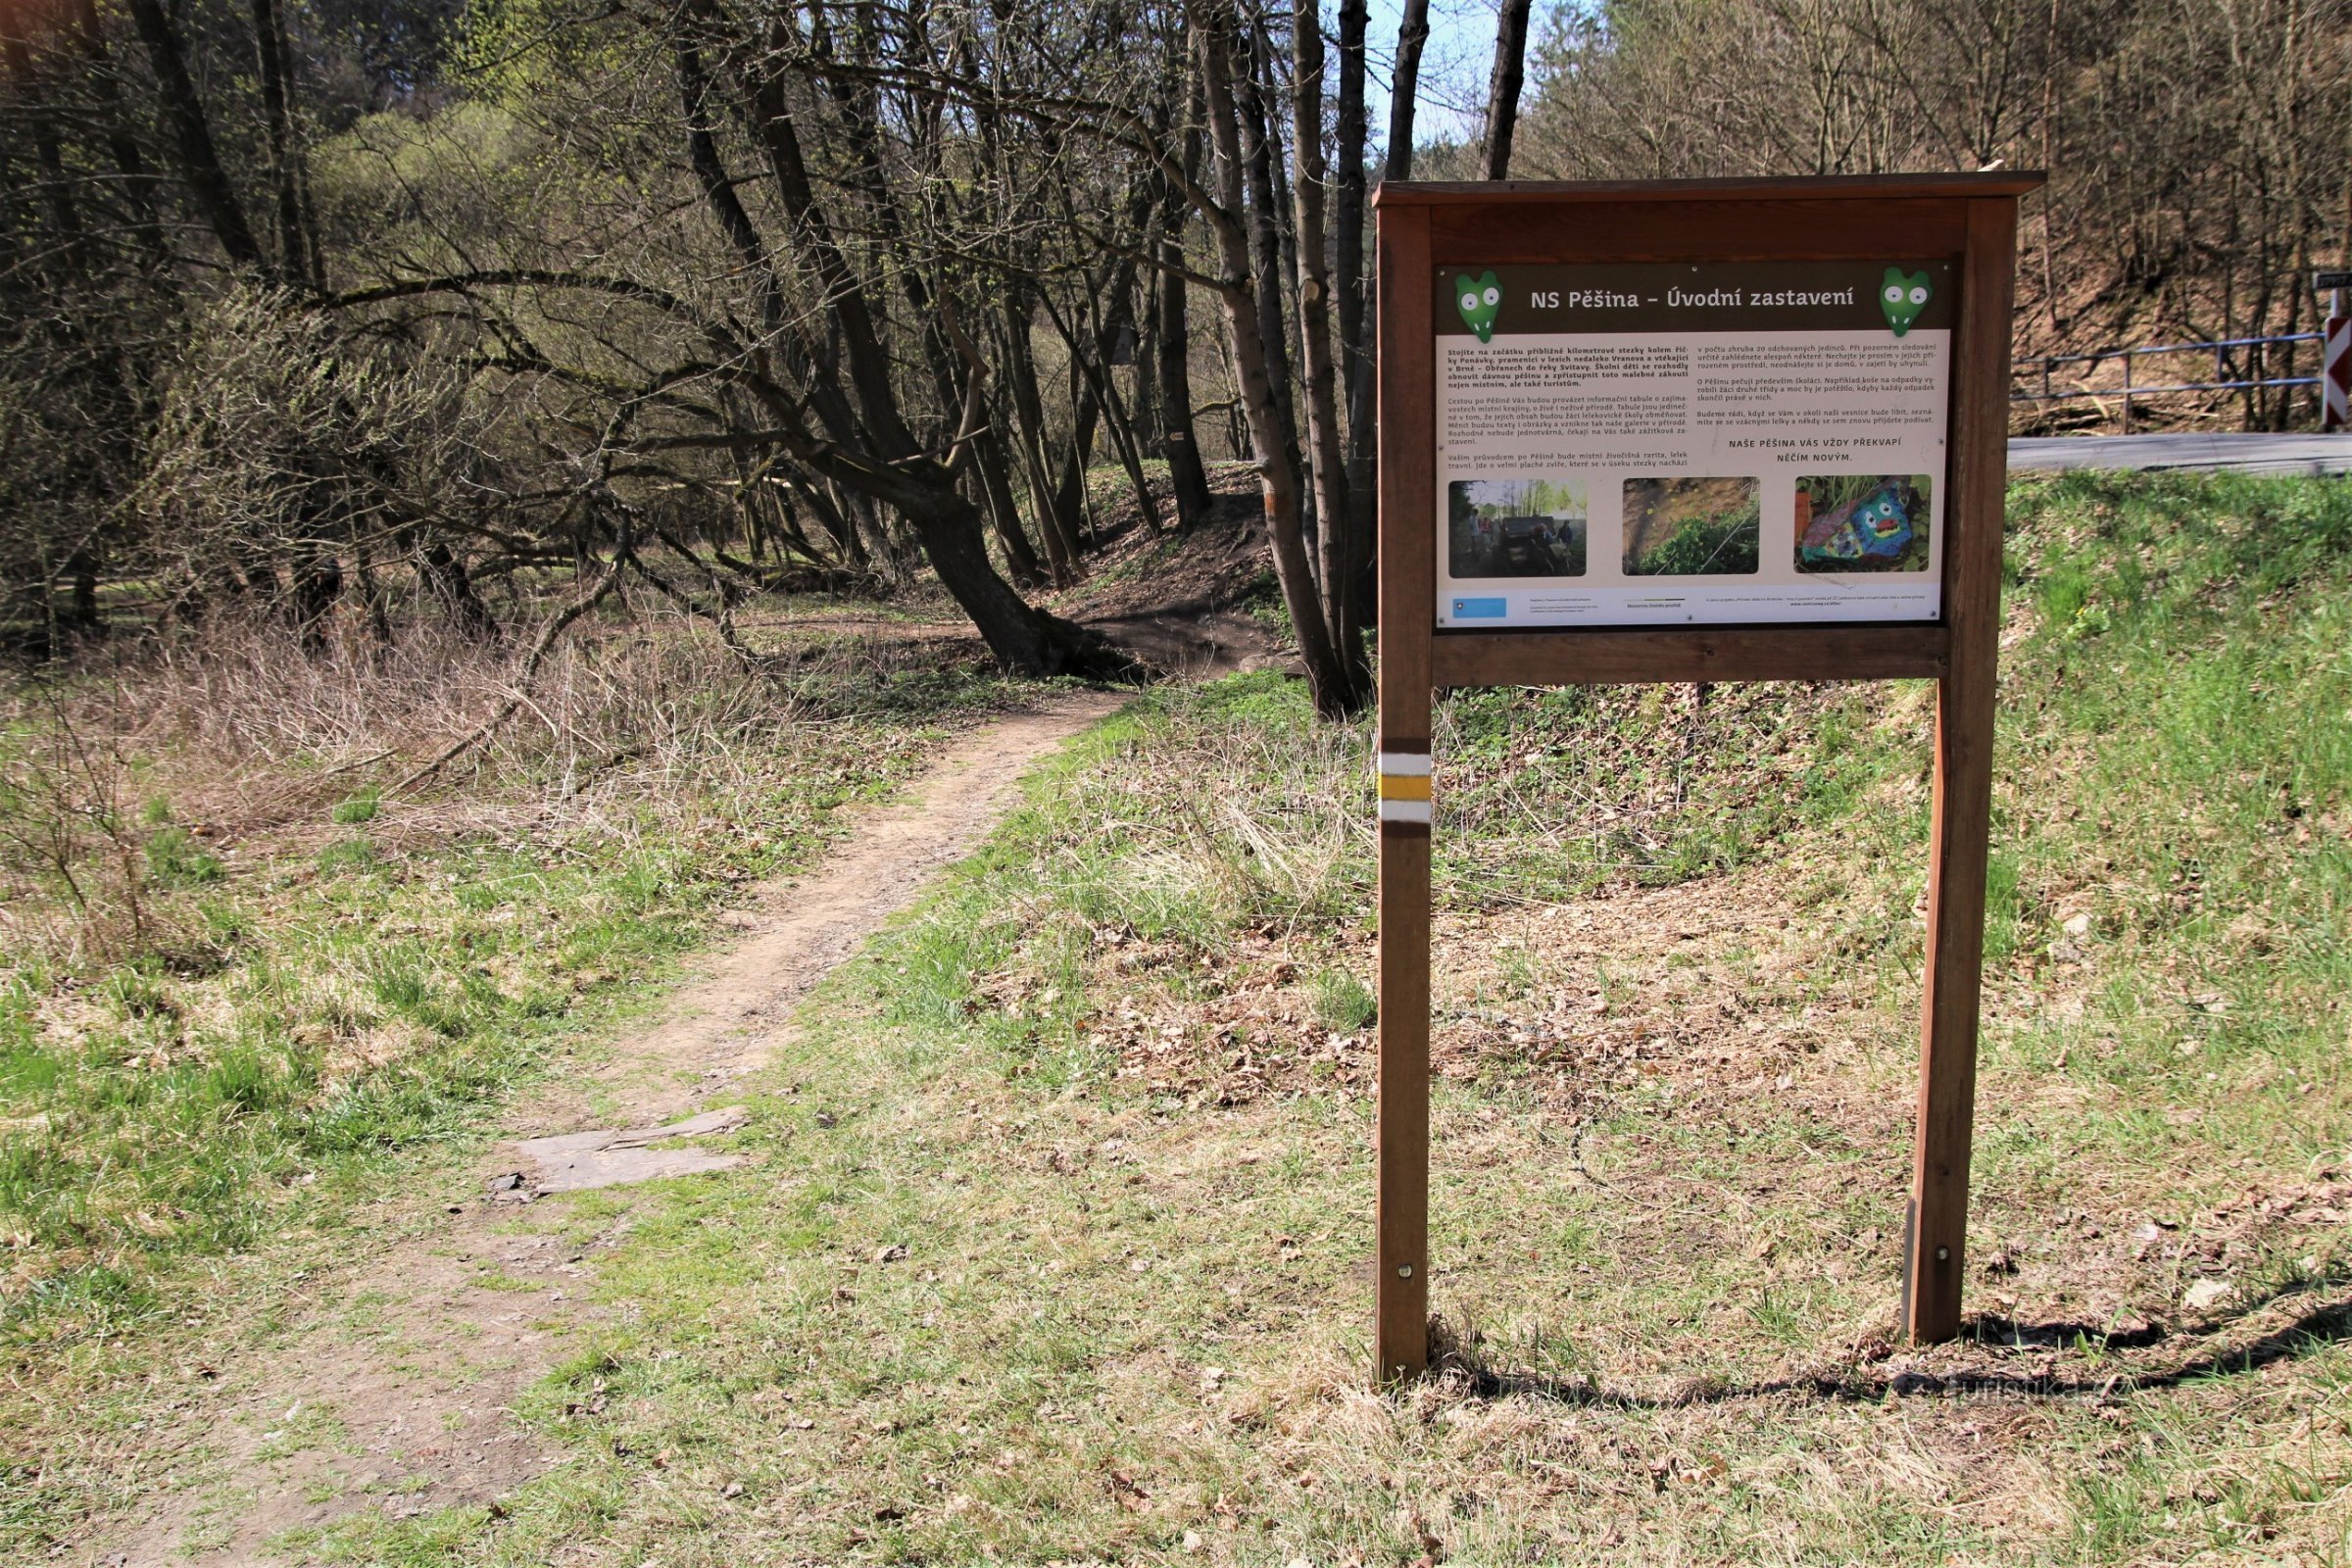 Introductory information board at the beginning of the educational trail